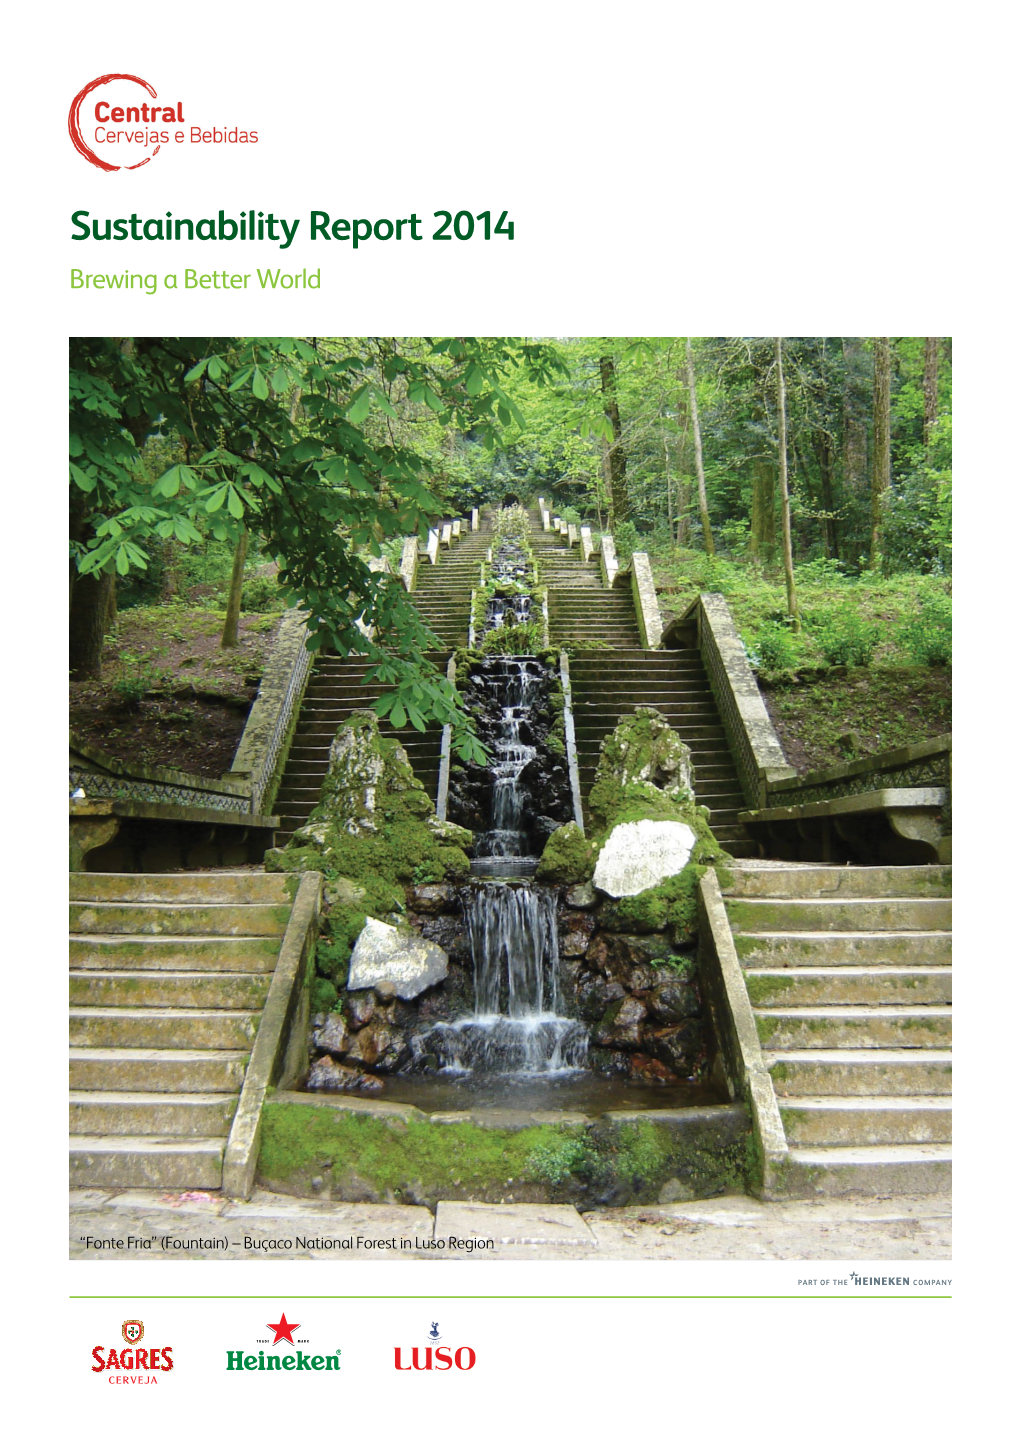 Sustainability Report 2014 Brewing a Better World